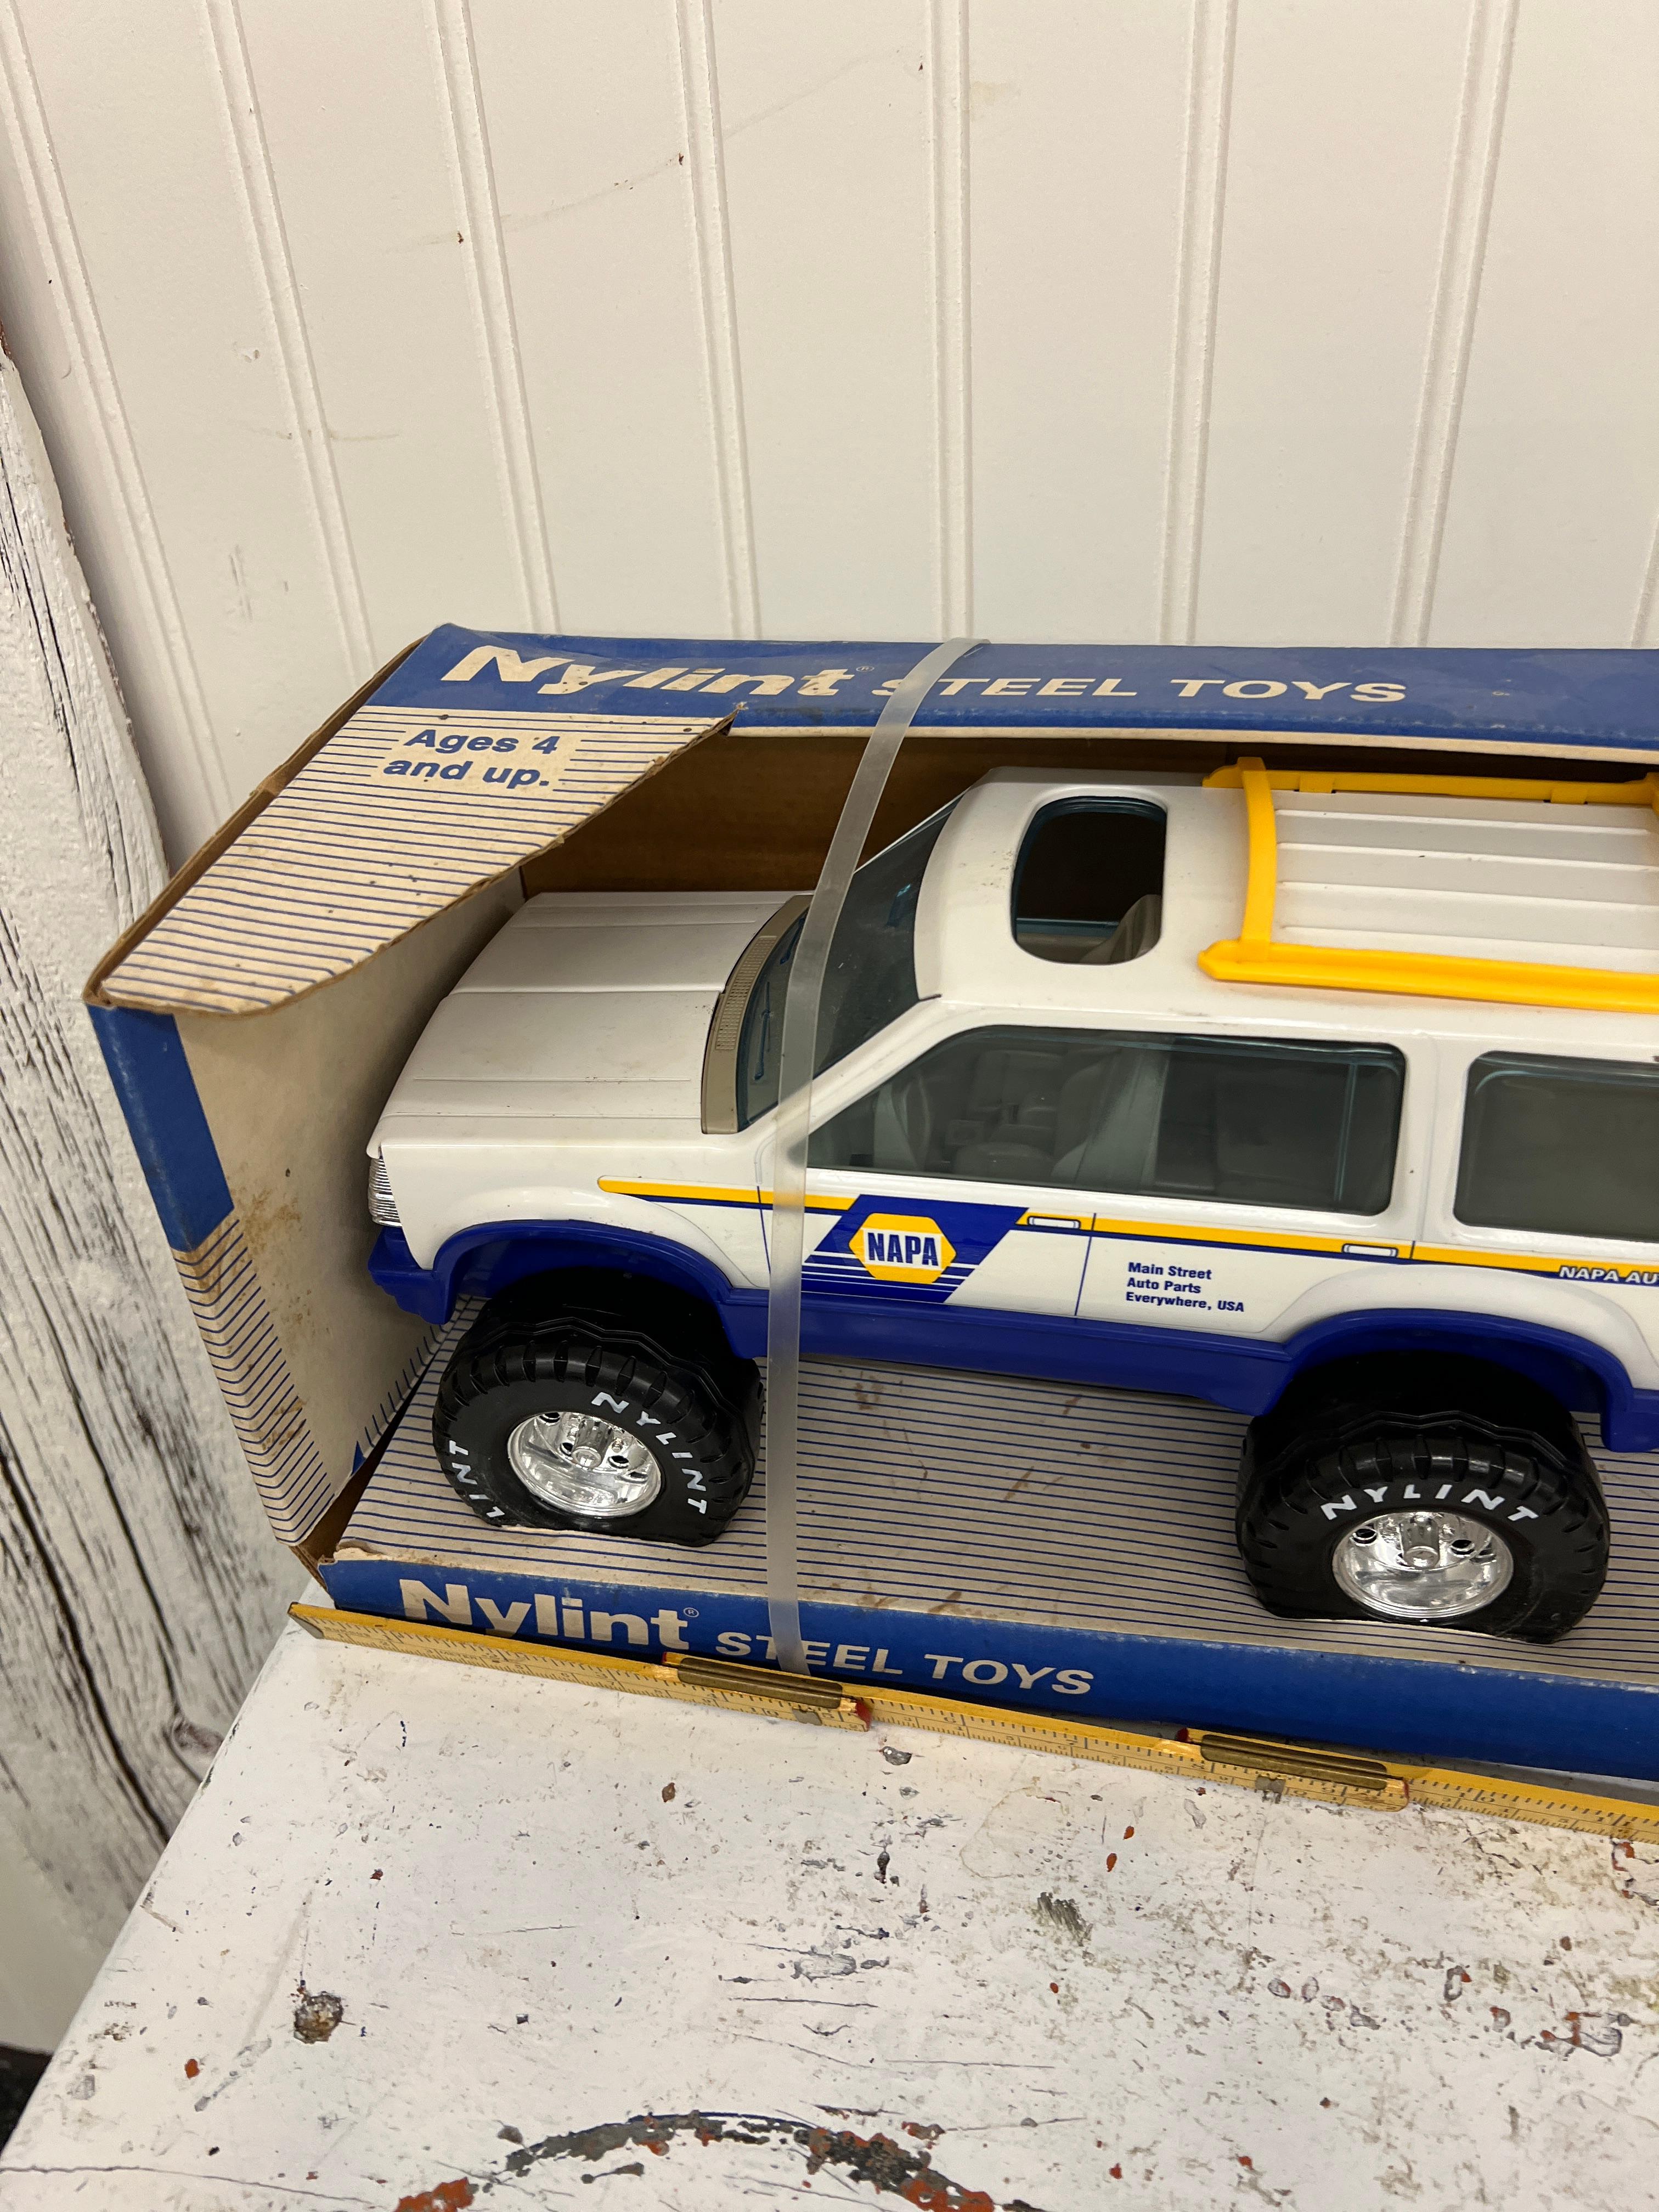 1980s Nylint NAPA 4X4 Power Prop Combo Steel Toys in original factory box